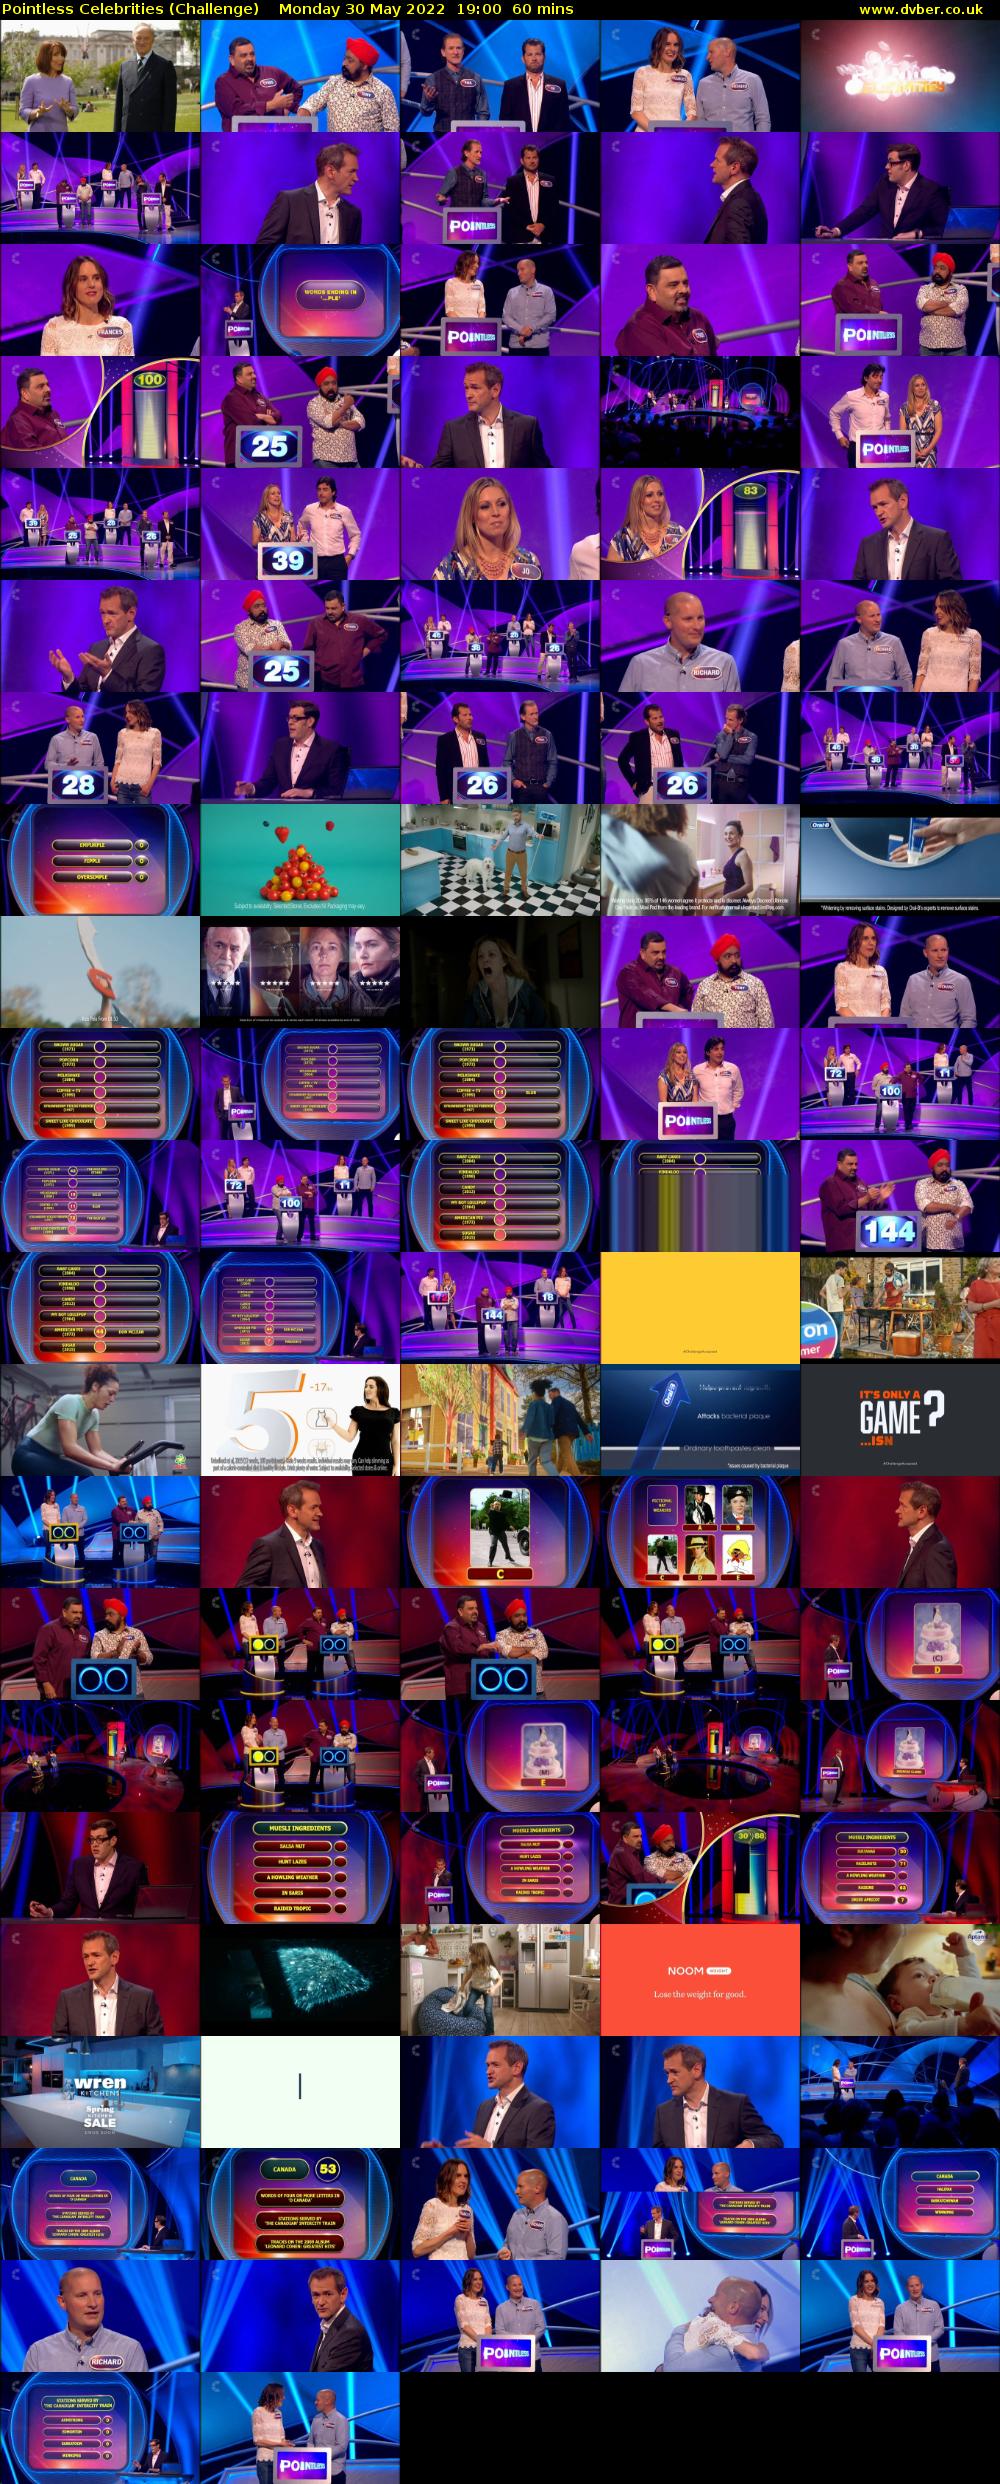 Pointless Celebrities (Challenge) Monday 30 May 2022 19:00 - 20:00